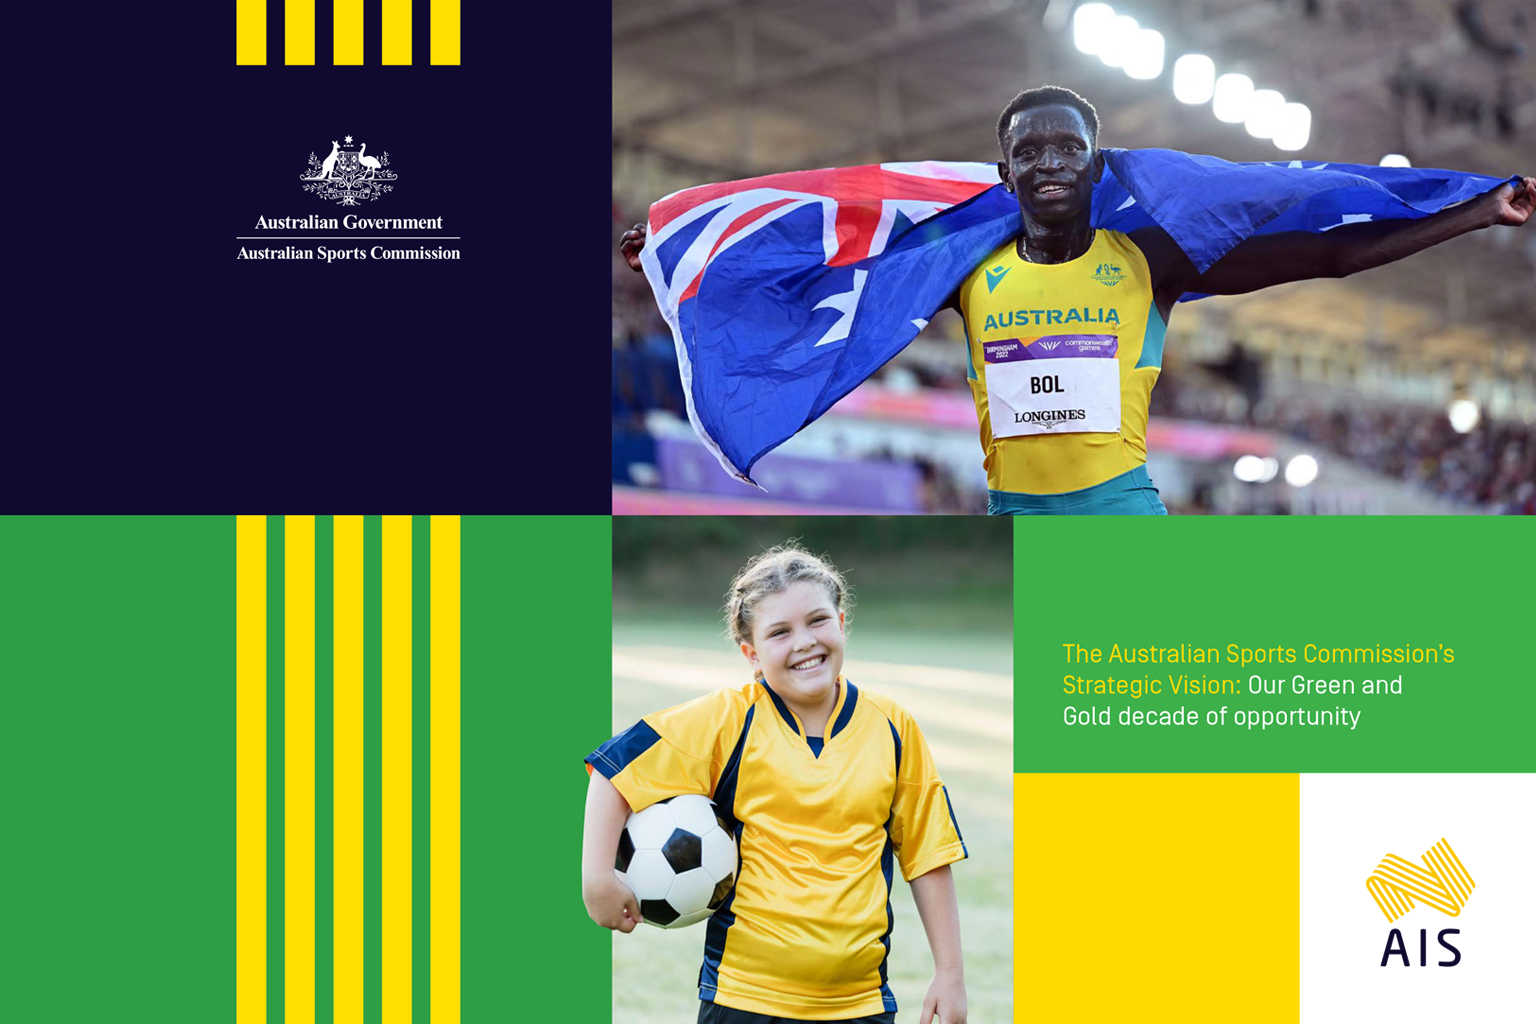 The Australia Sport's Commission's Strategic Vision: Our Green and Gold decade of opportunity, including an image of athlete Peter Bol and a girl football player